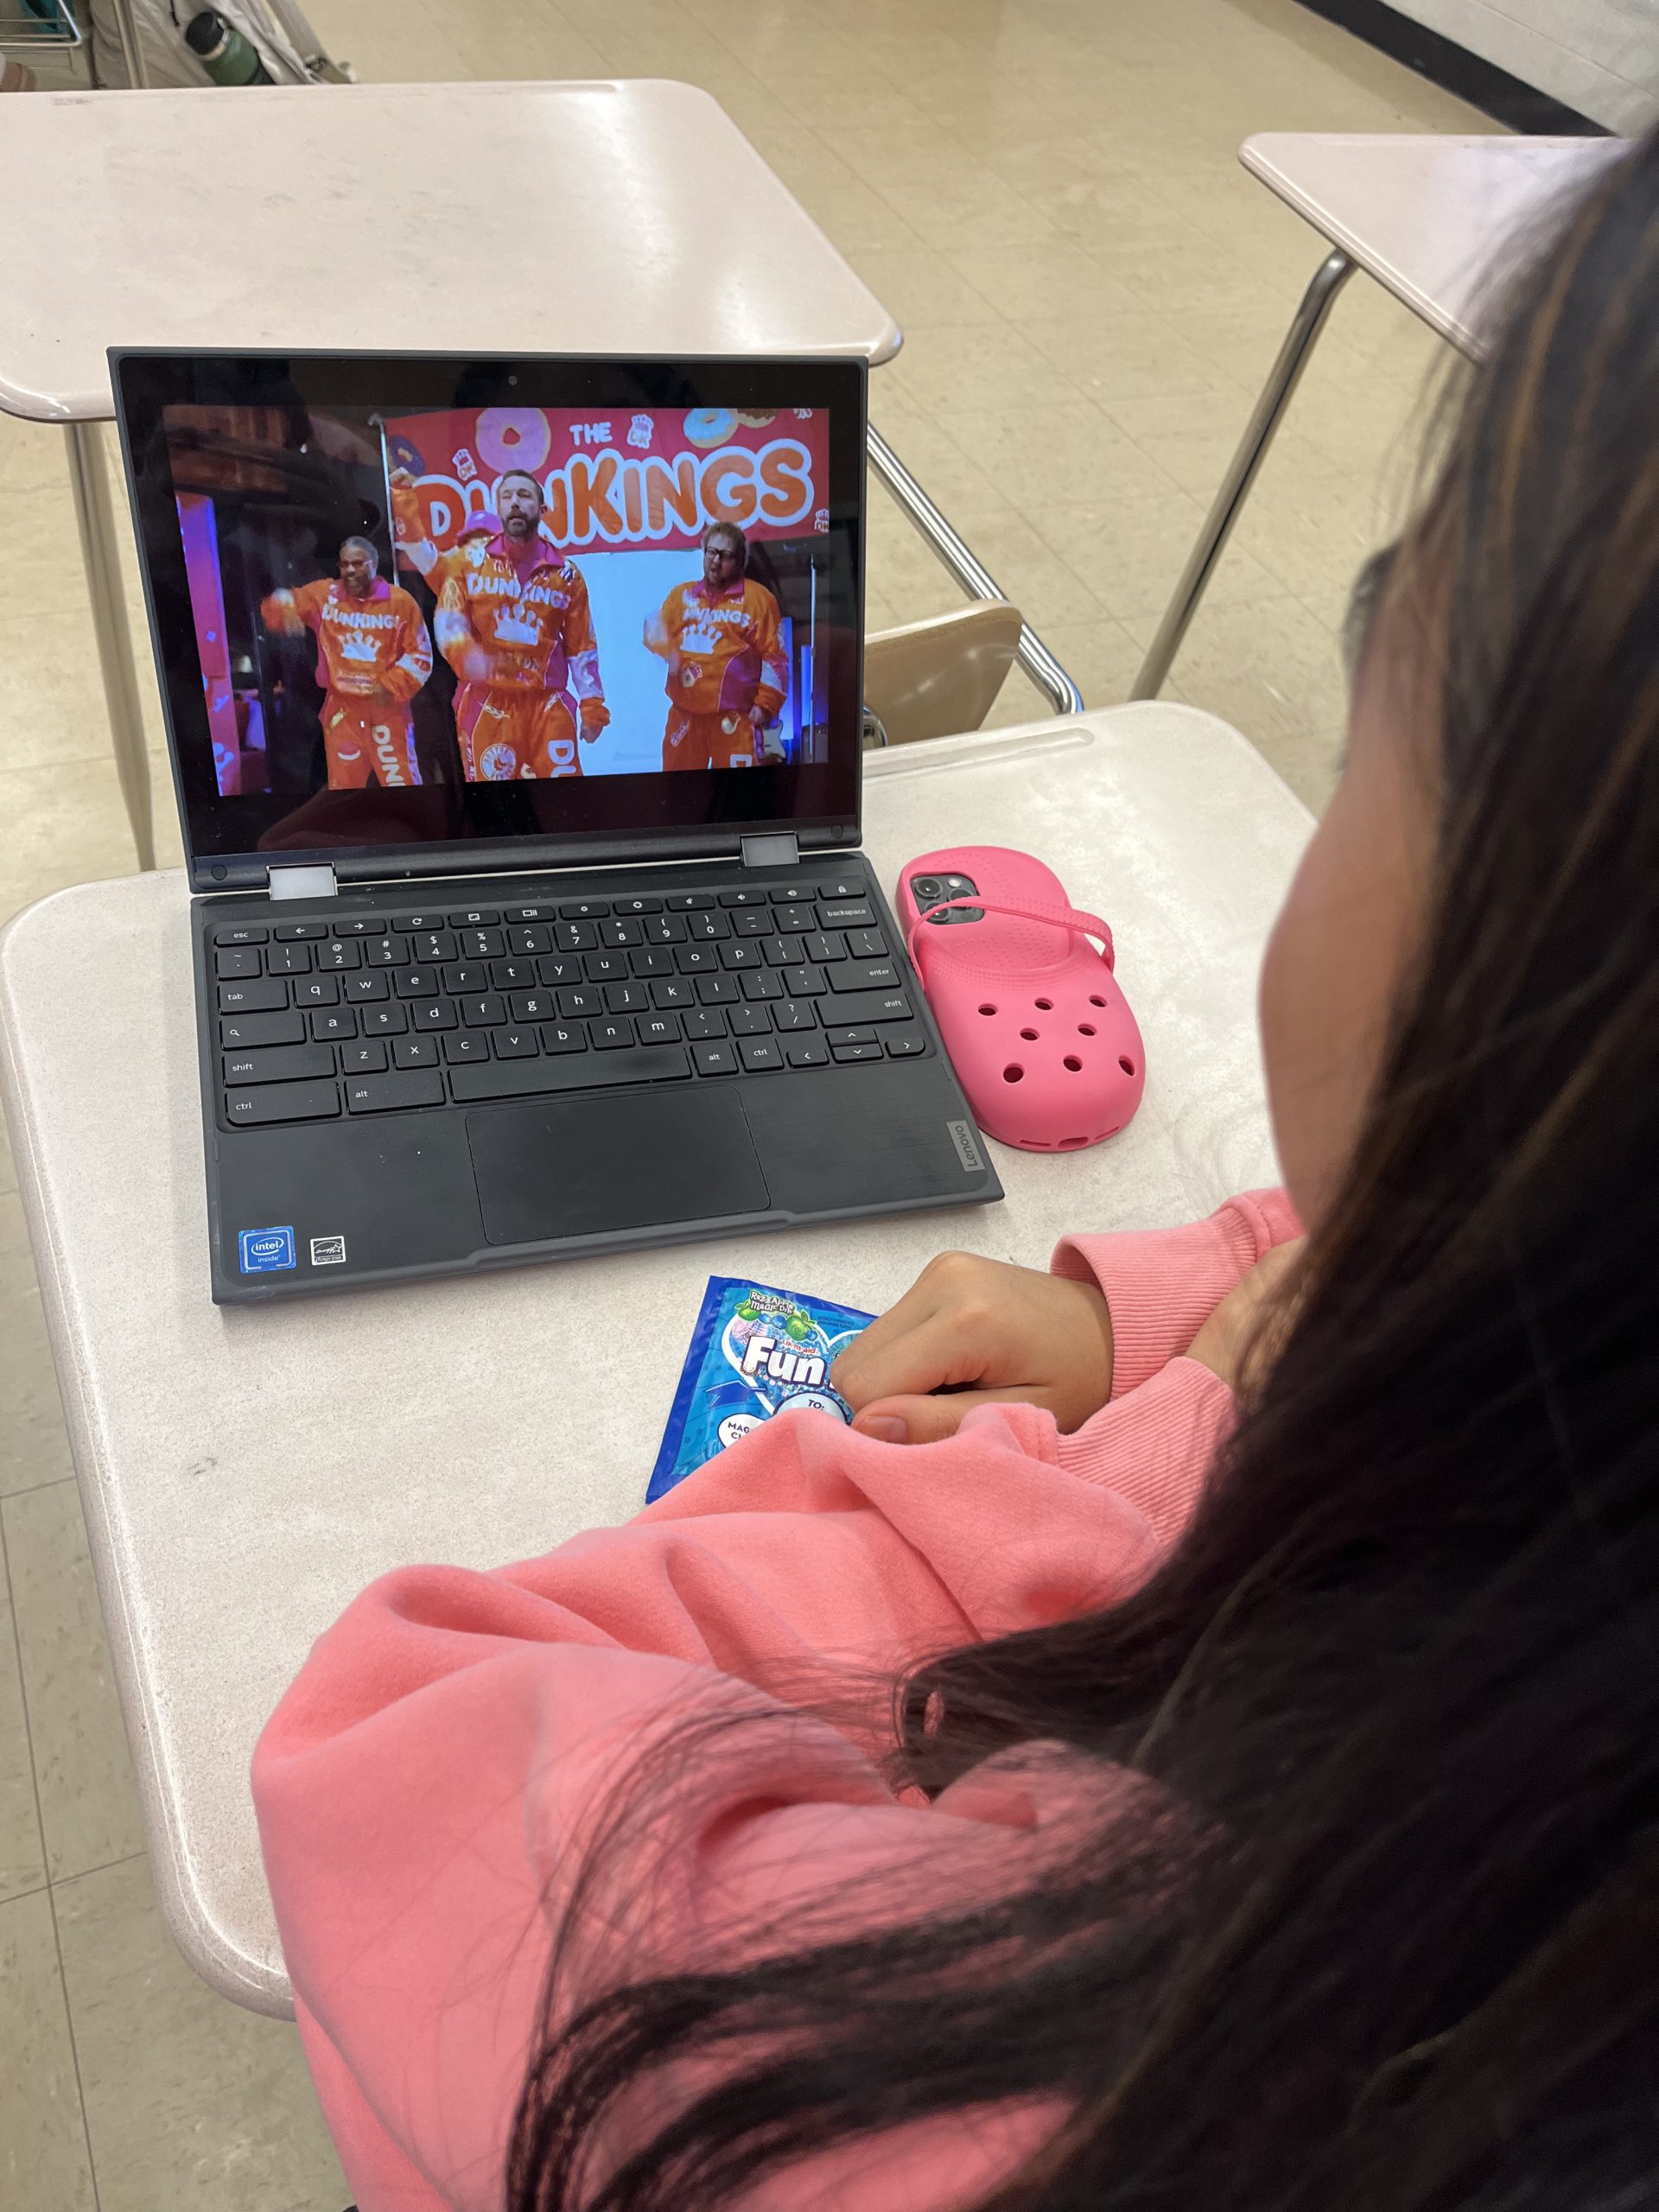 Sophomore Megan Lomotan watches Dunkin Donuts The DunKings Super Bowl commercial during extra class time in AP Gov.